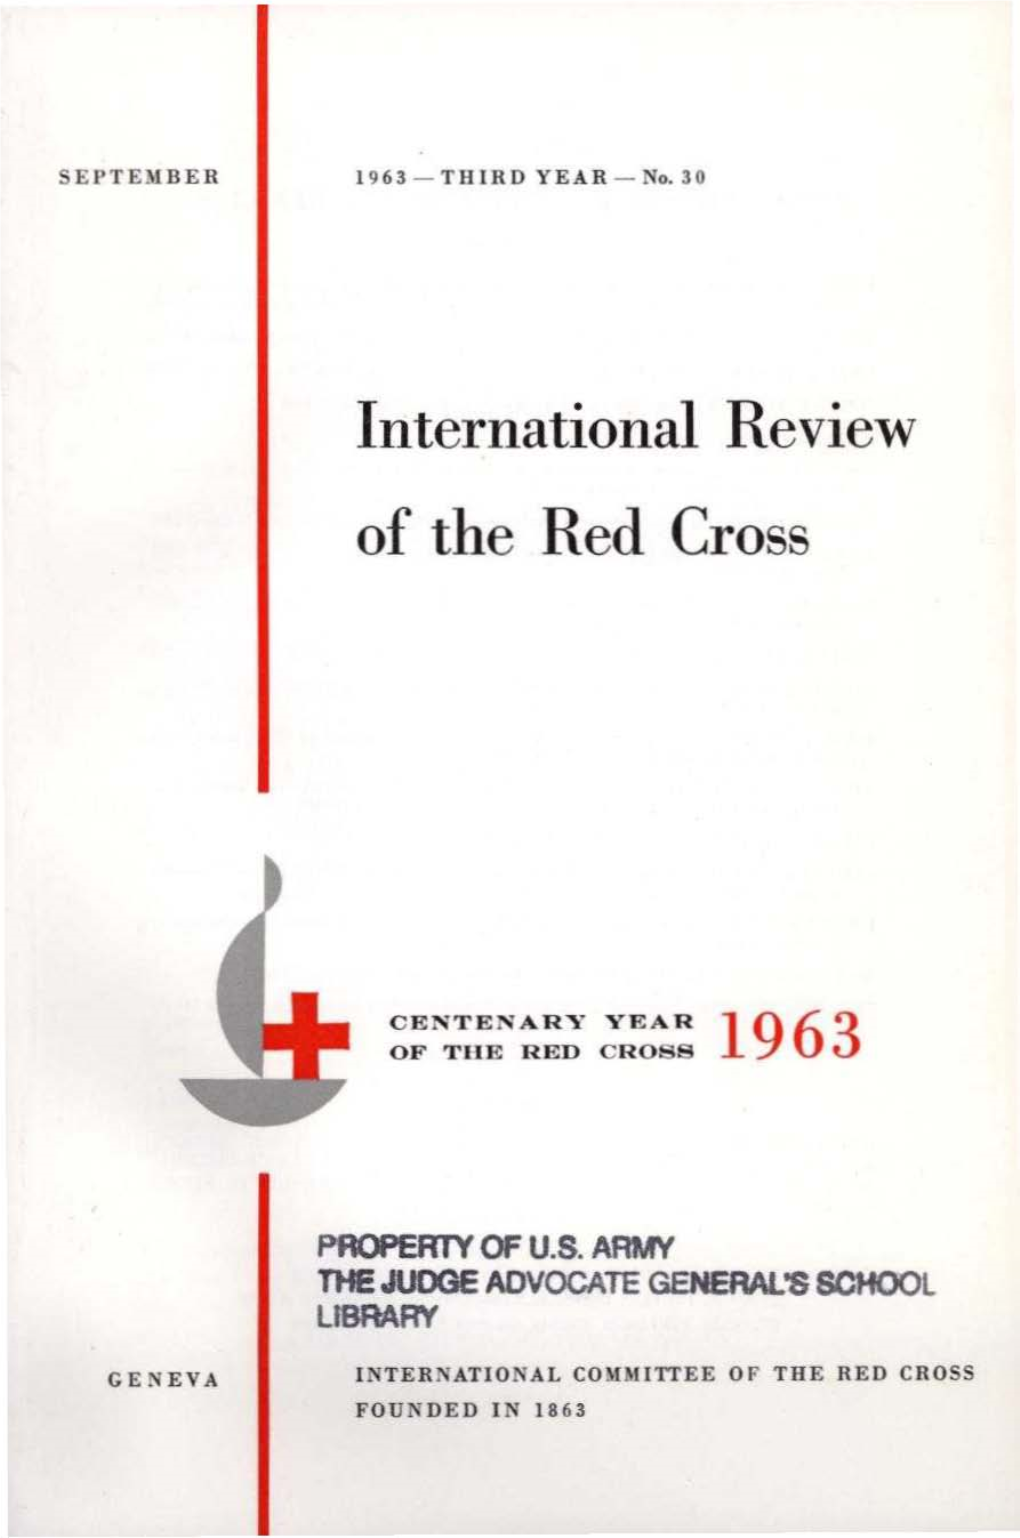 International Review of the Red Cross, September 1963, Third Year